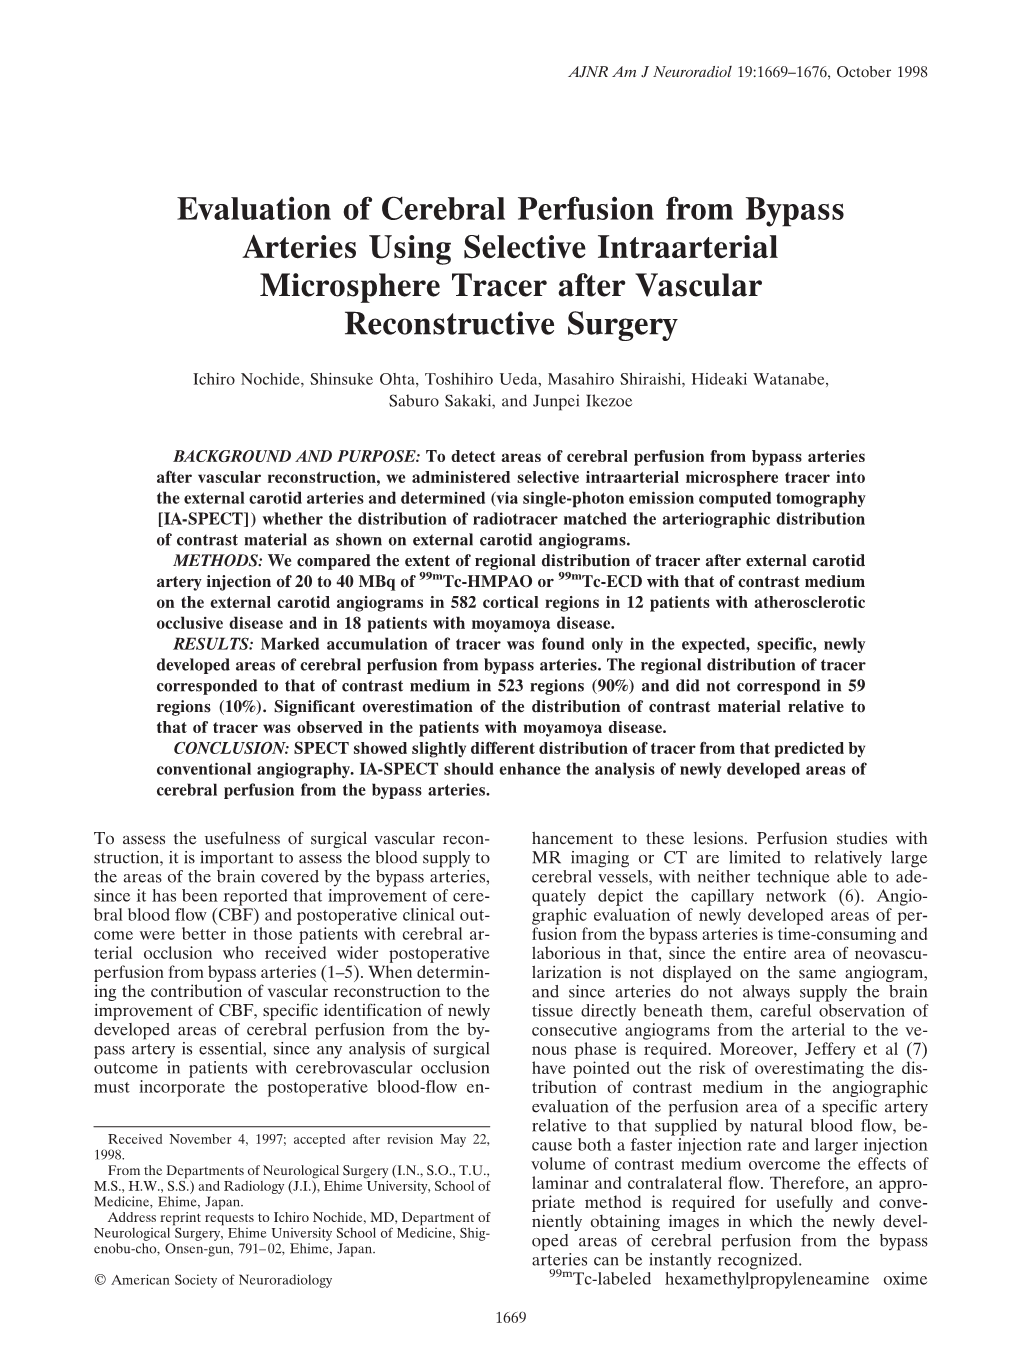 Evaluation of Cerebral Perfusion from Bypass Arteries Using Selective Intraarterial Microsphere Tracer After Vascular Reconstructive Surgery